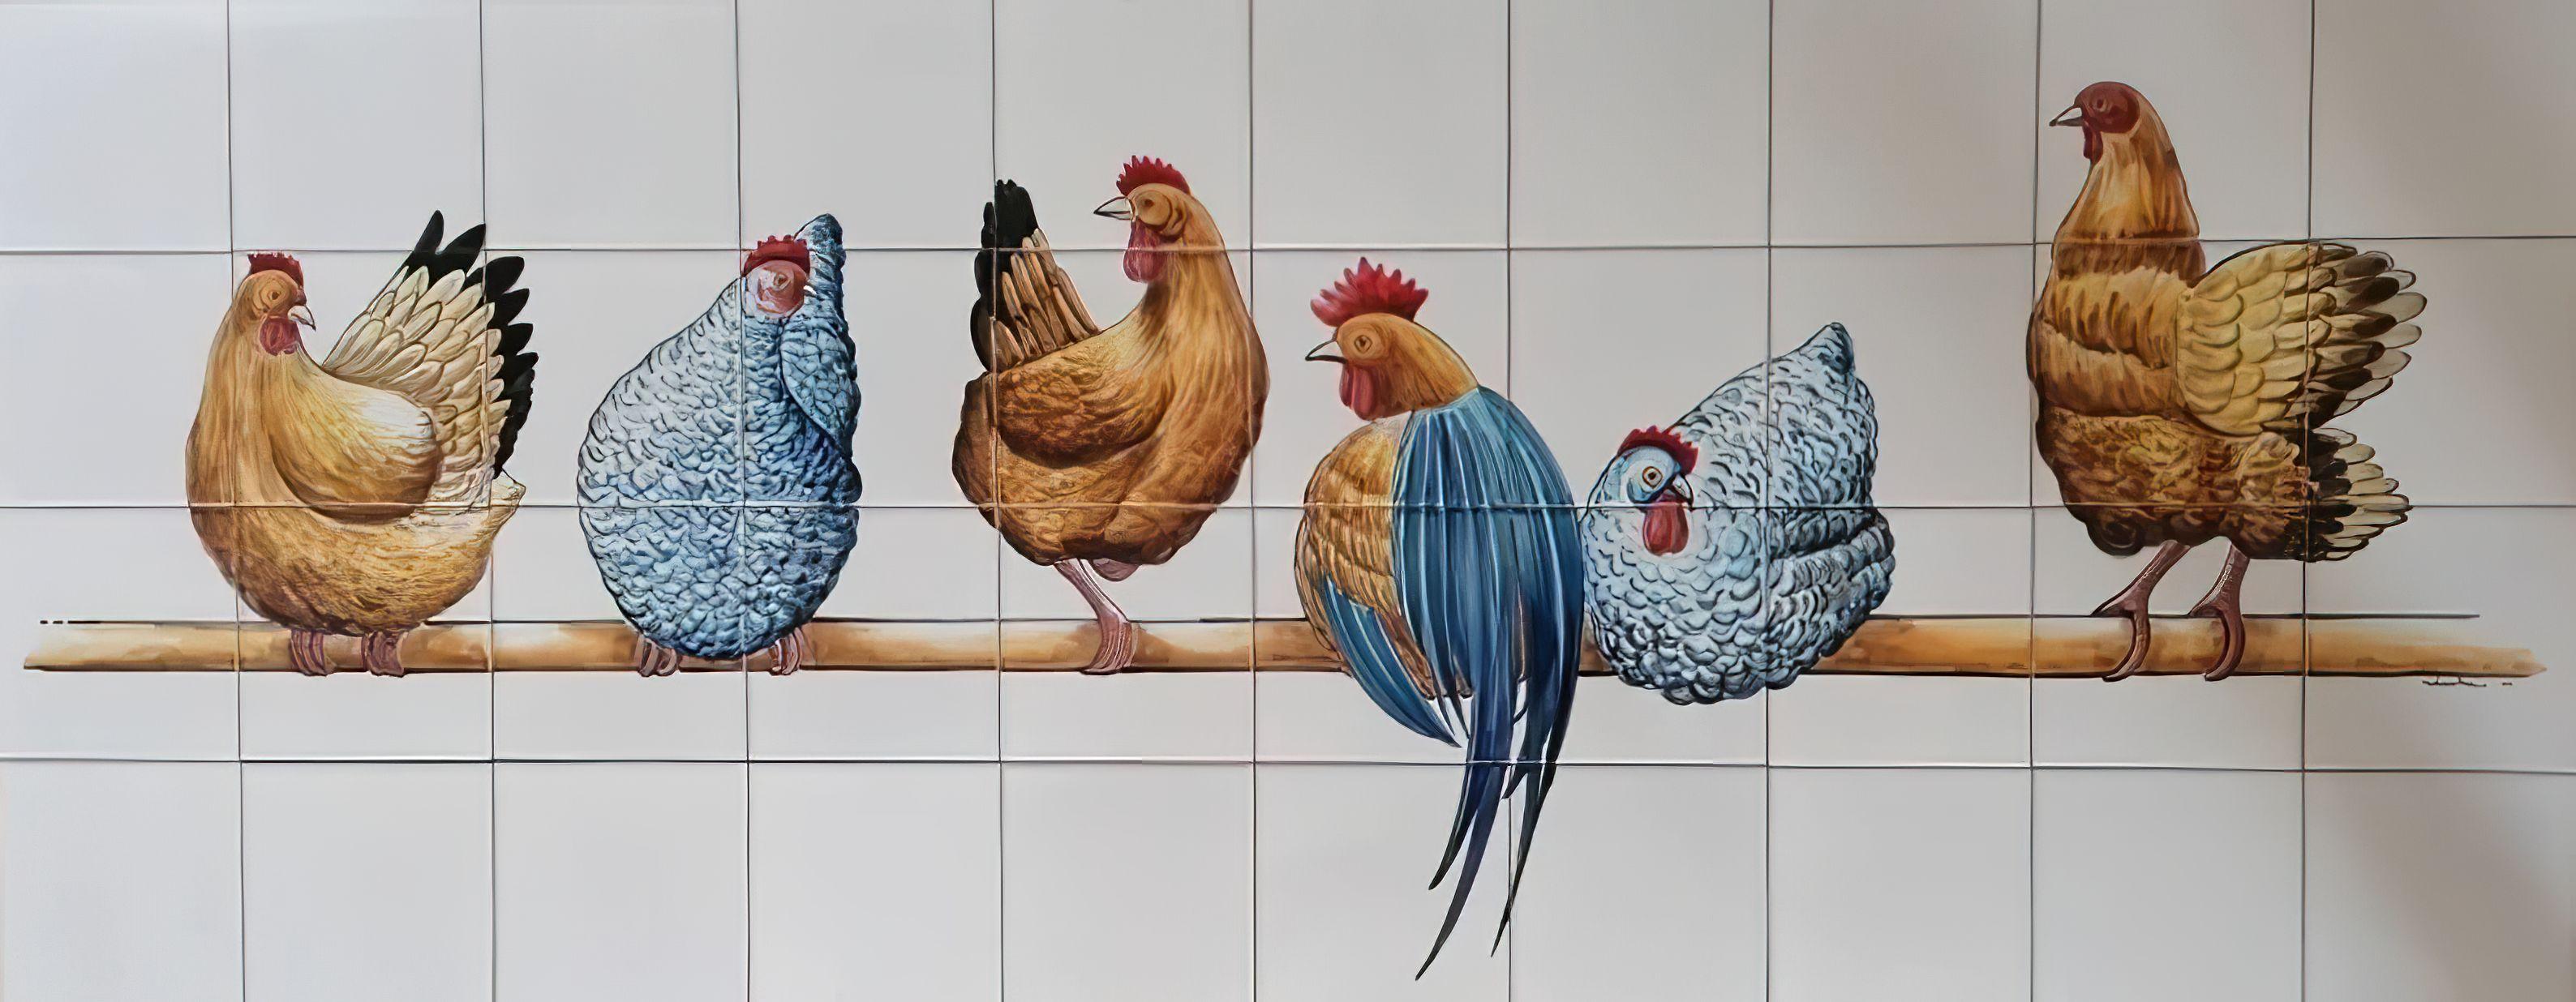 Azulejos Portuguese Kitchen Tiles "Chicken" Hand Painted and Signed by Artist For Sale